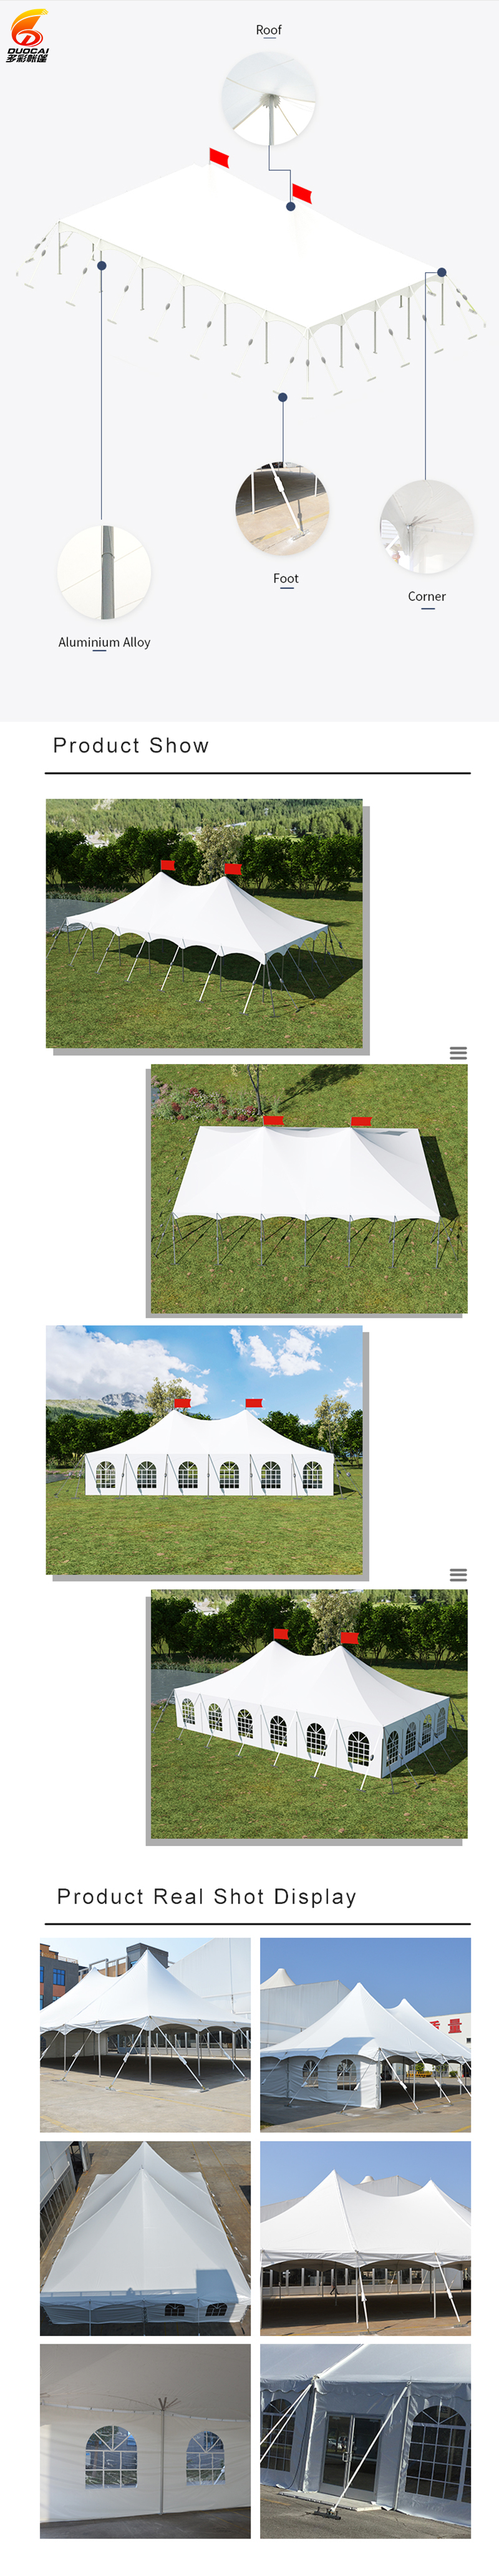 Waterproof and windproof aluminum large pole tent